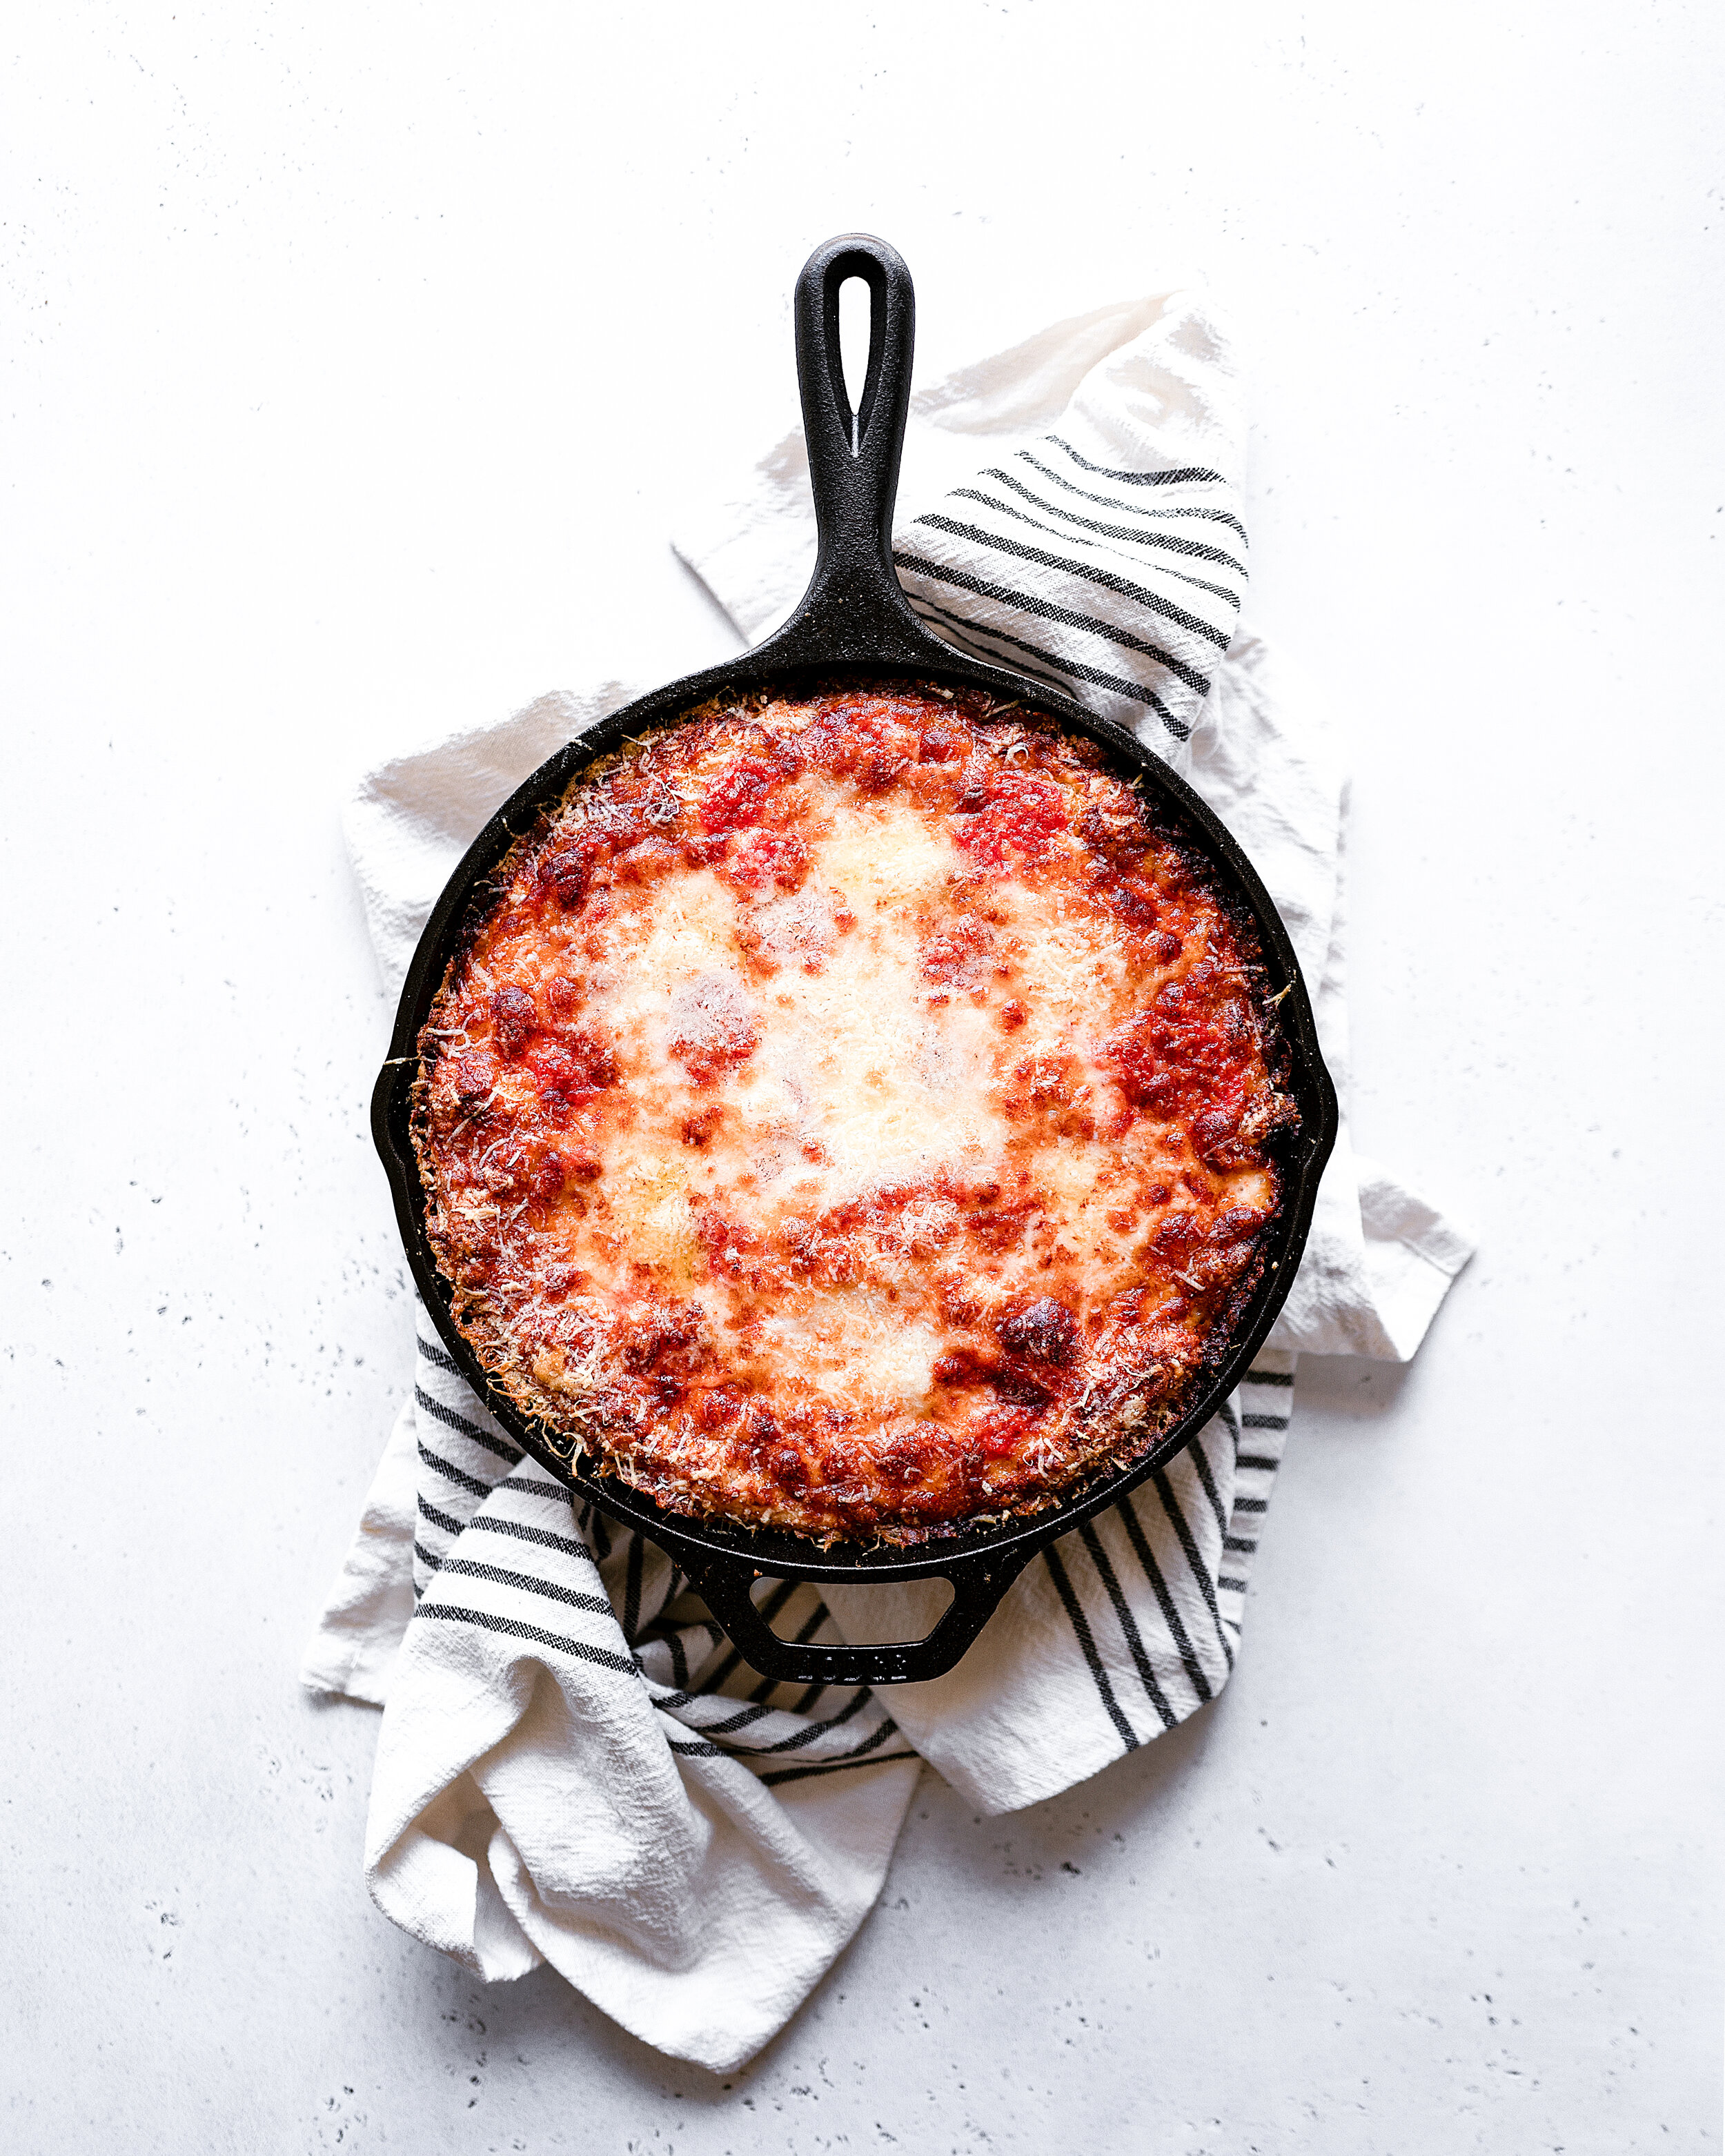 Crispy Cheesy Pan Pizza Recipe With Pictures